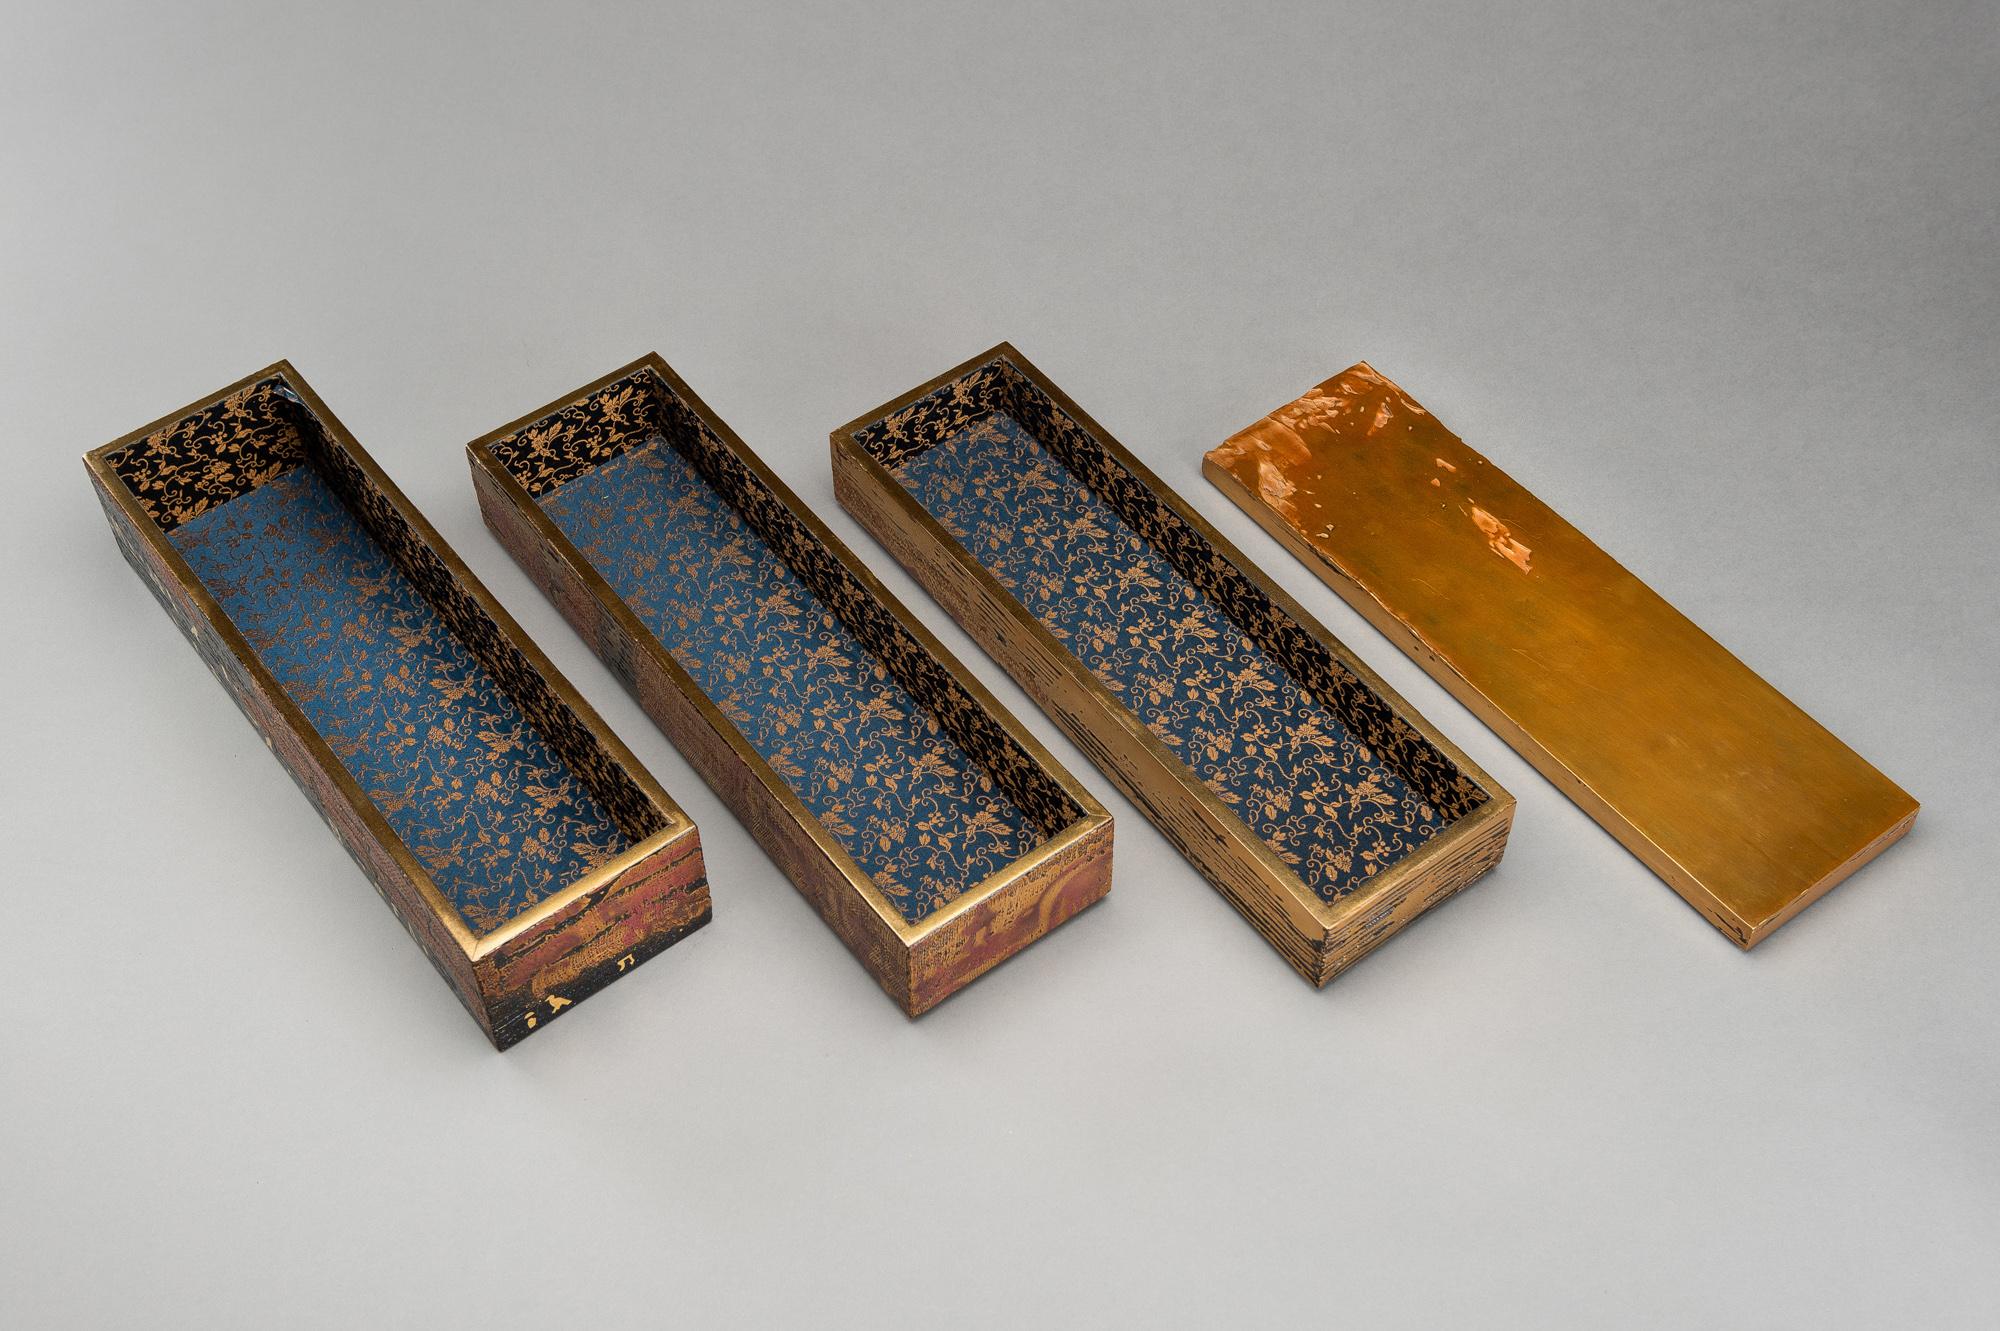 Japanese lacquer oblong storage box by Hiroshi Hayashi 林宏 (1967) For Sale 3